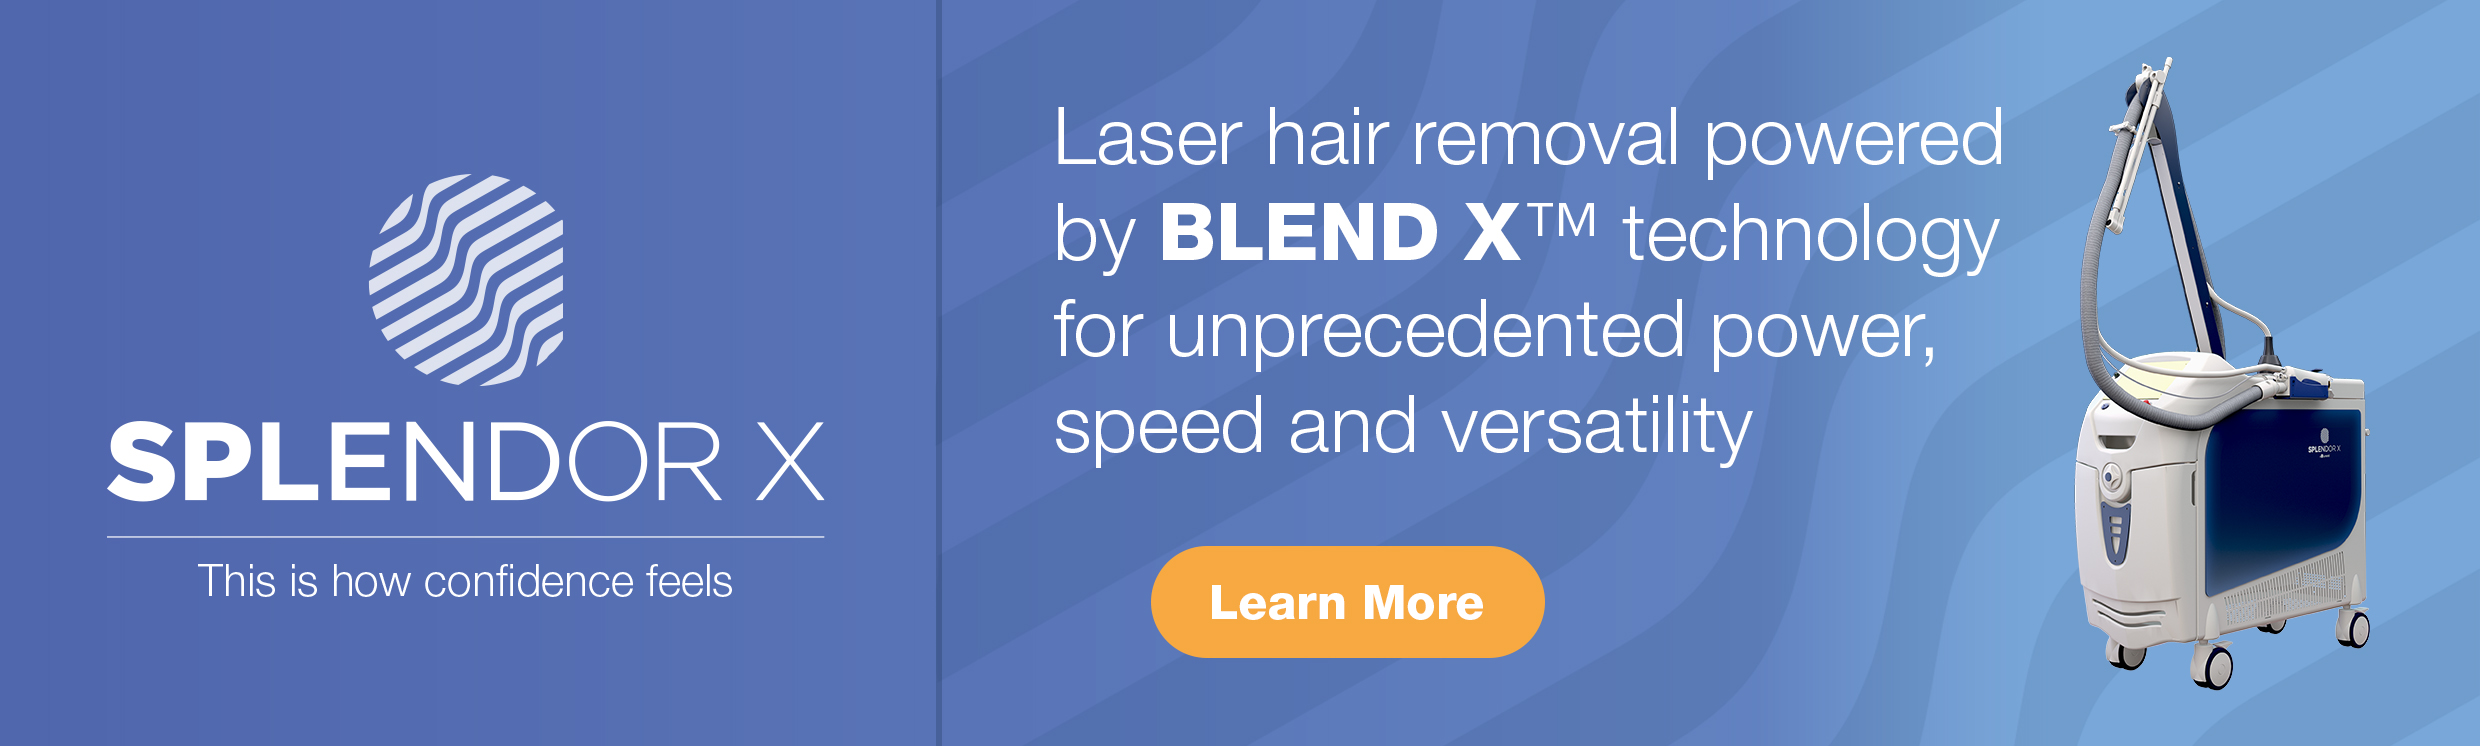 Laser hair removal powered by Blend X technology for unprecedented power, speed and versatility.